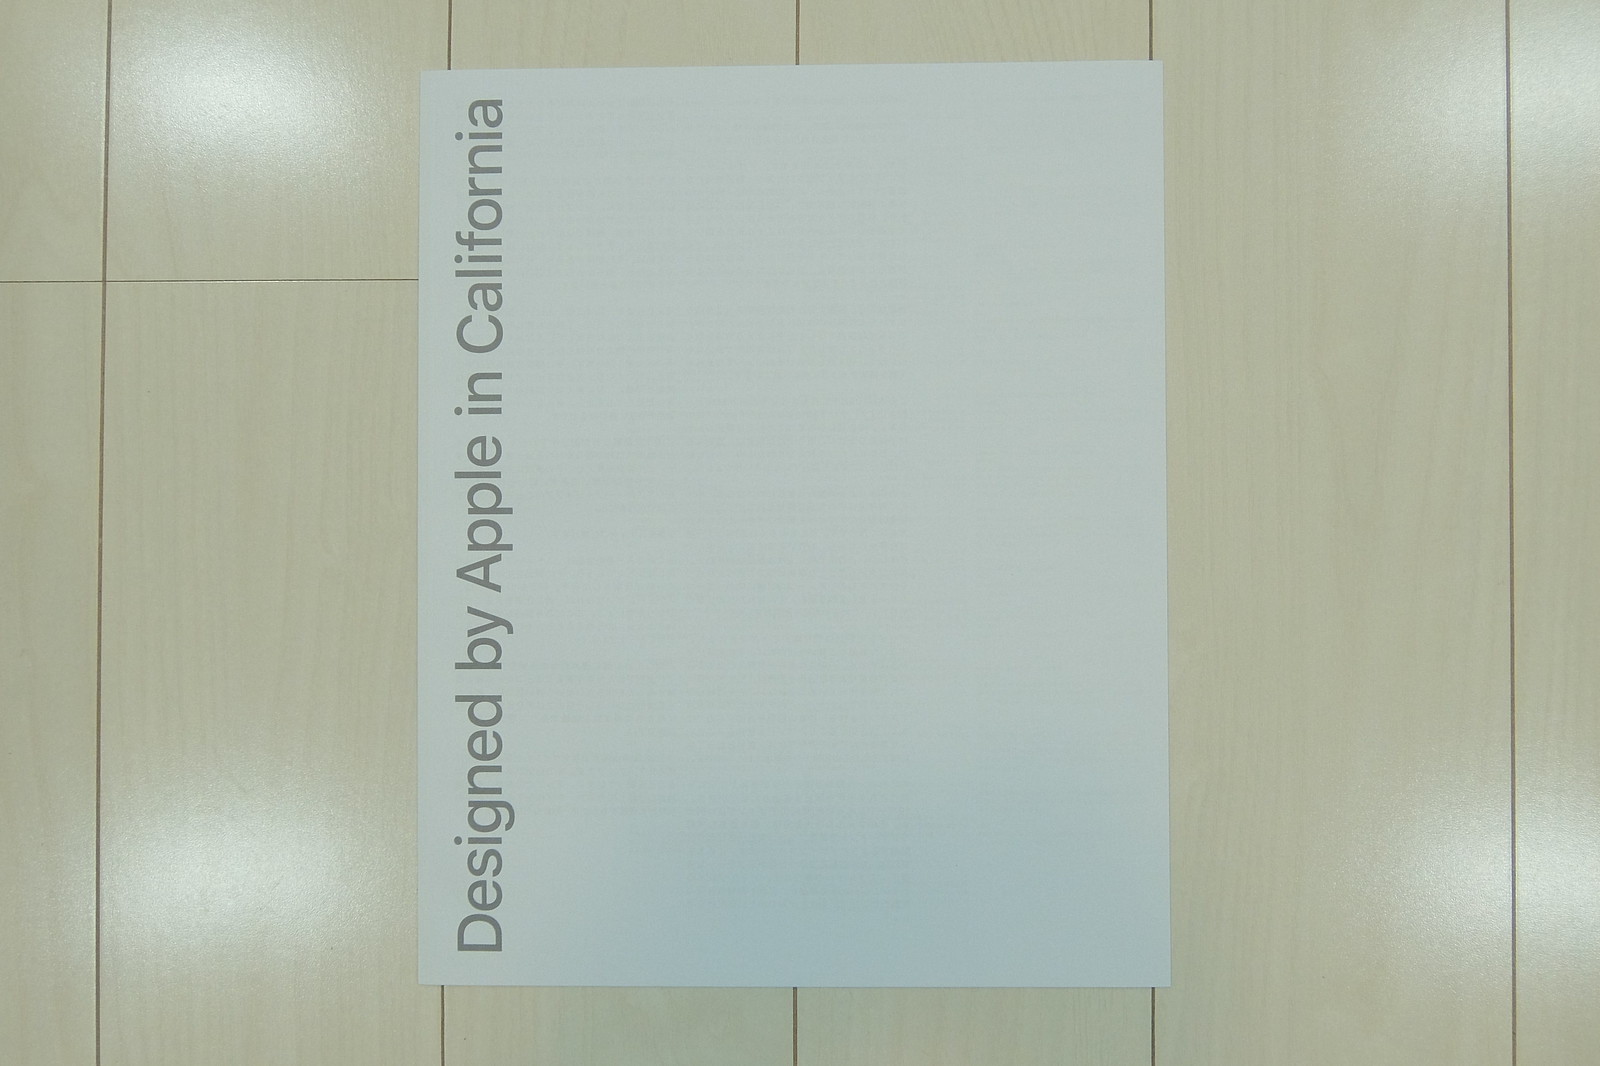 The Book "Design by Apple in California".